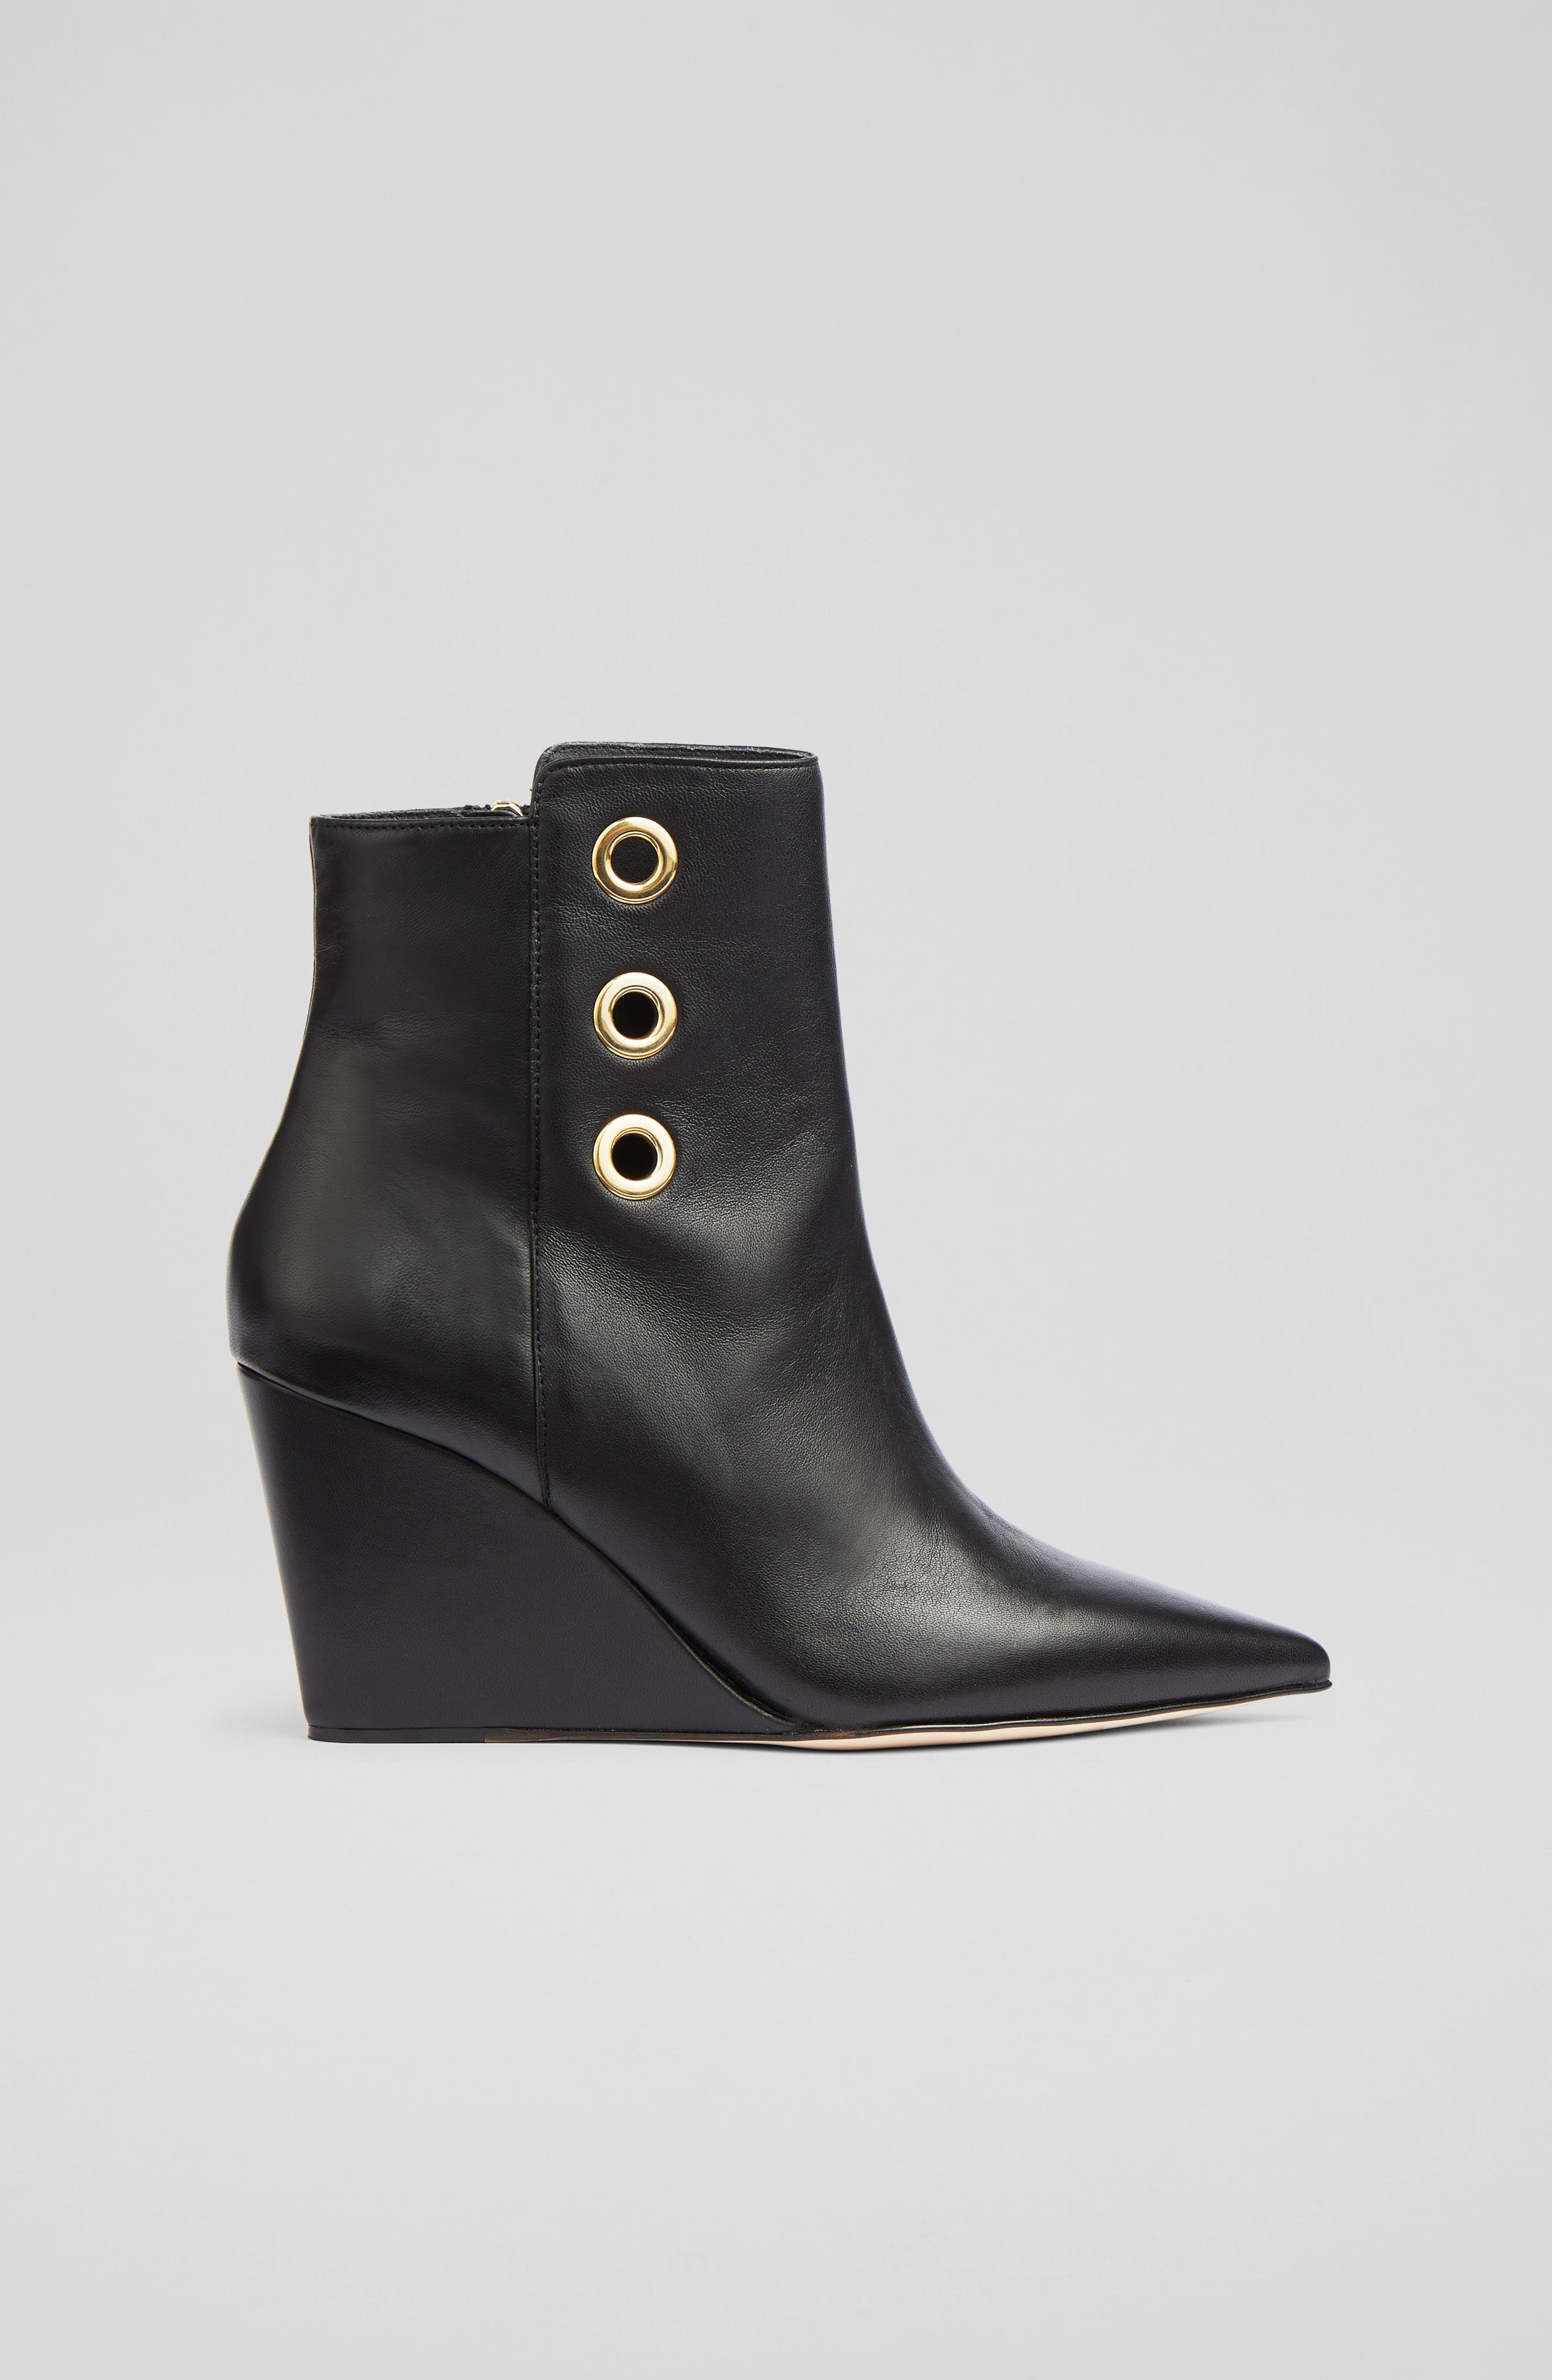 L.K.Bennett Brie Black Leather Wedge Ankle Boots, Black